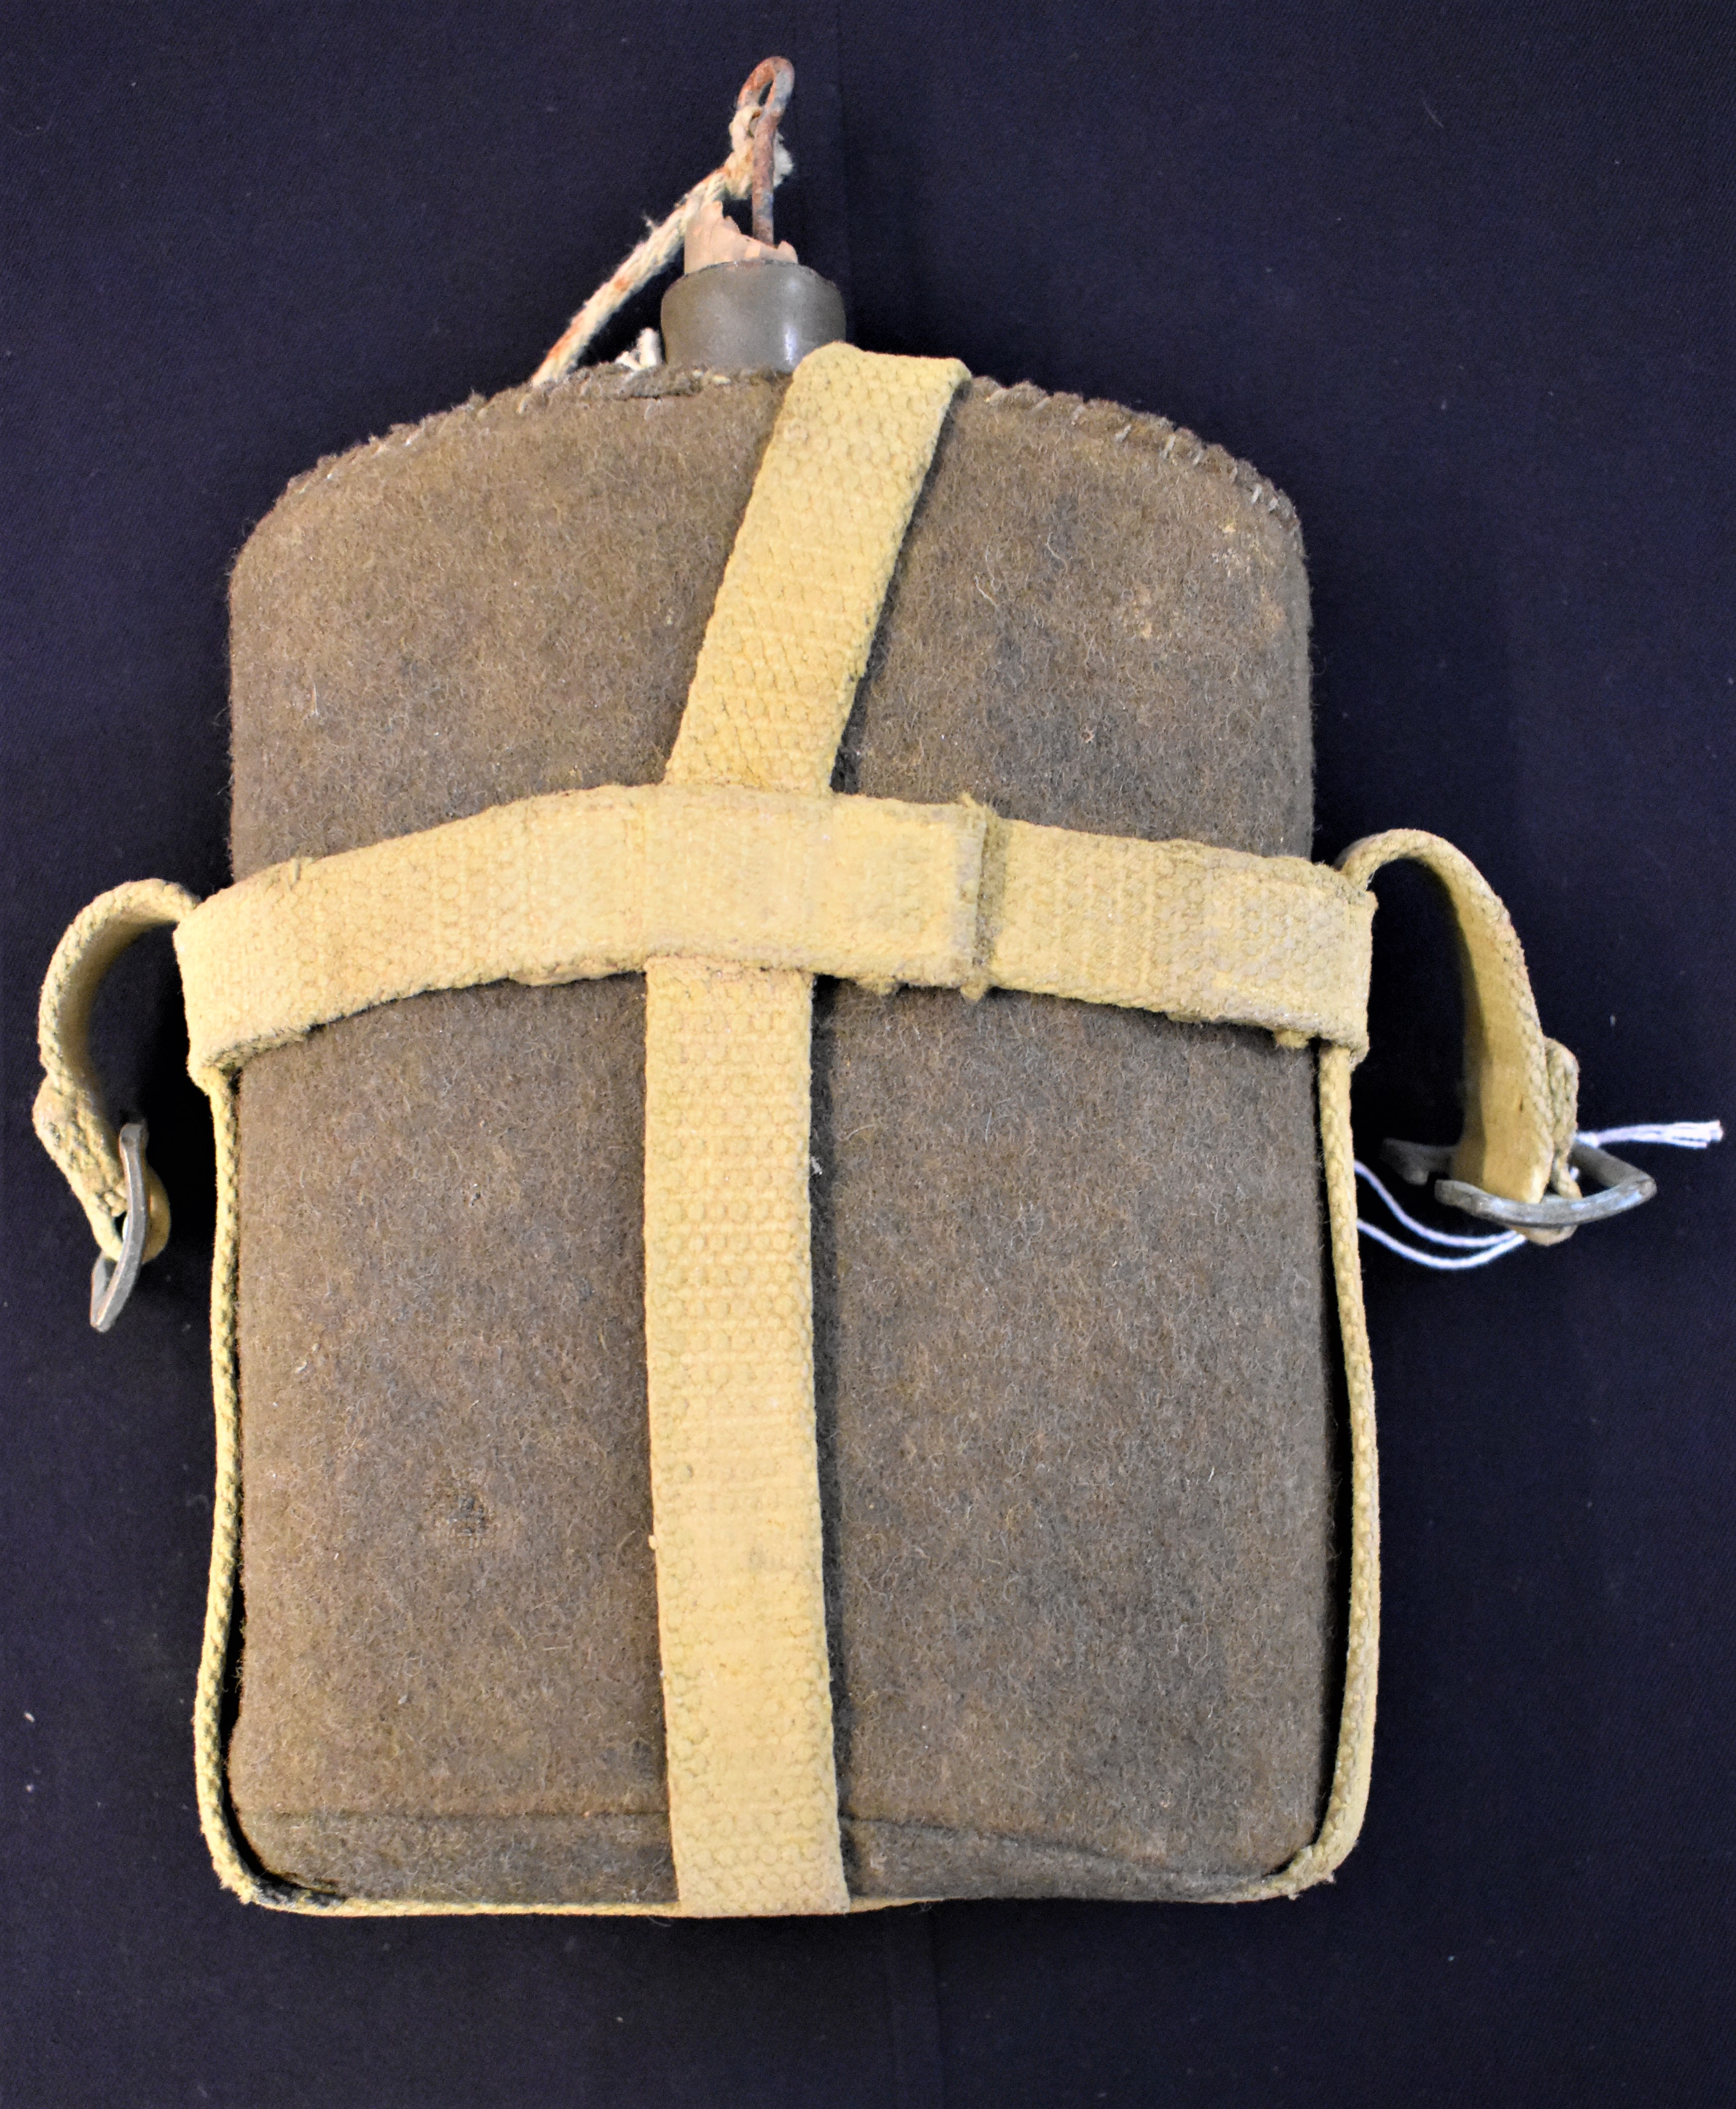 British P37 Pattern Water Bottle with webbing carrier, the bottle covered with uniform material, - Image 3 of 3